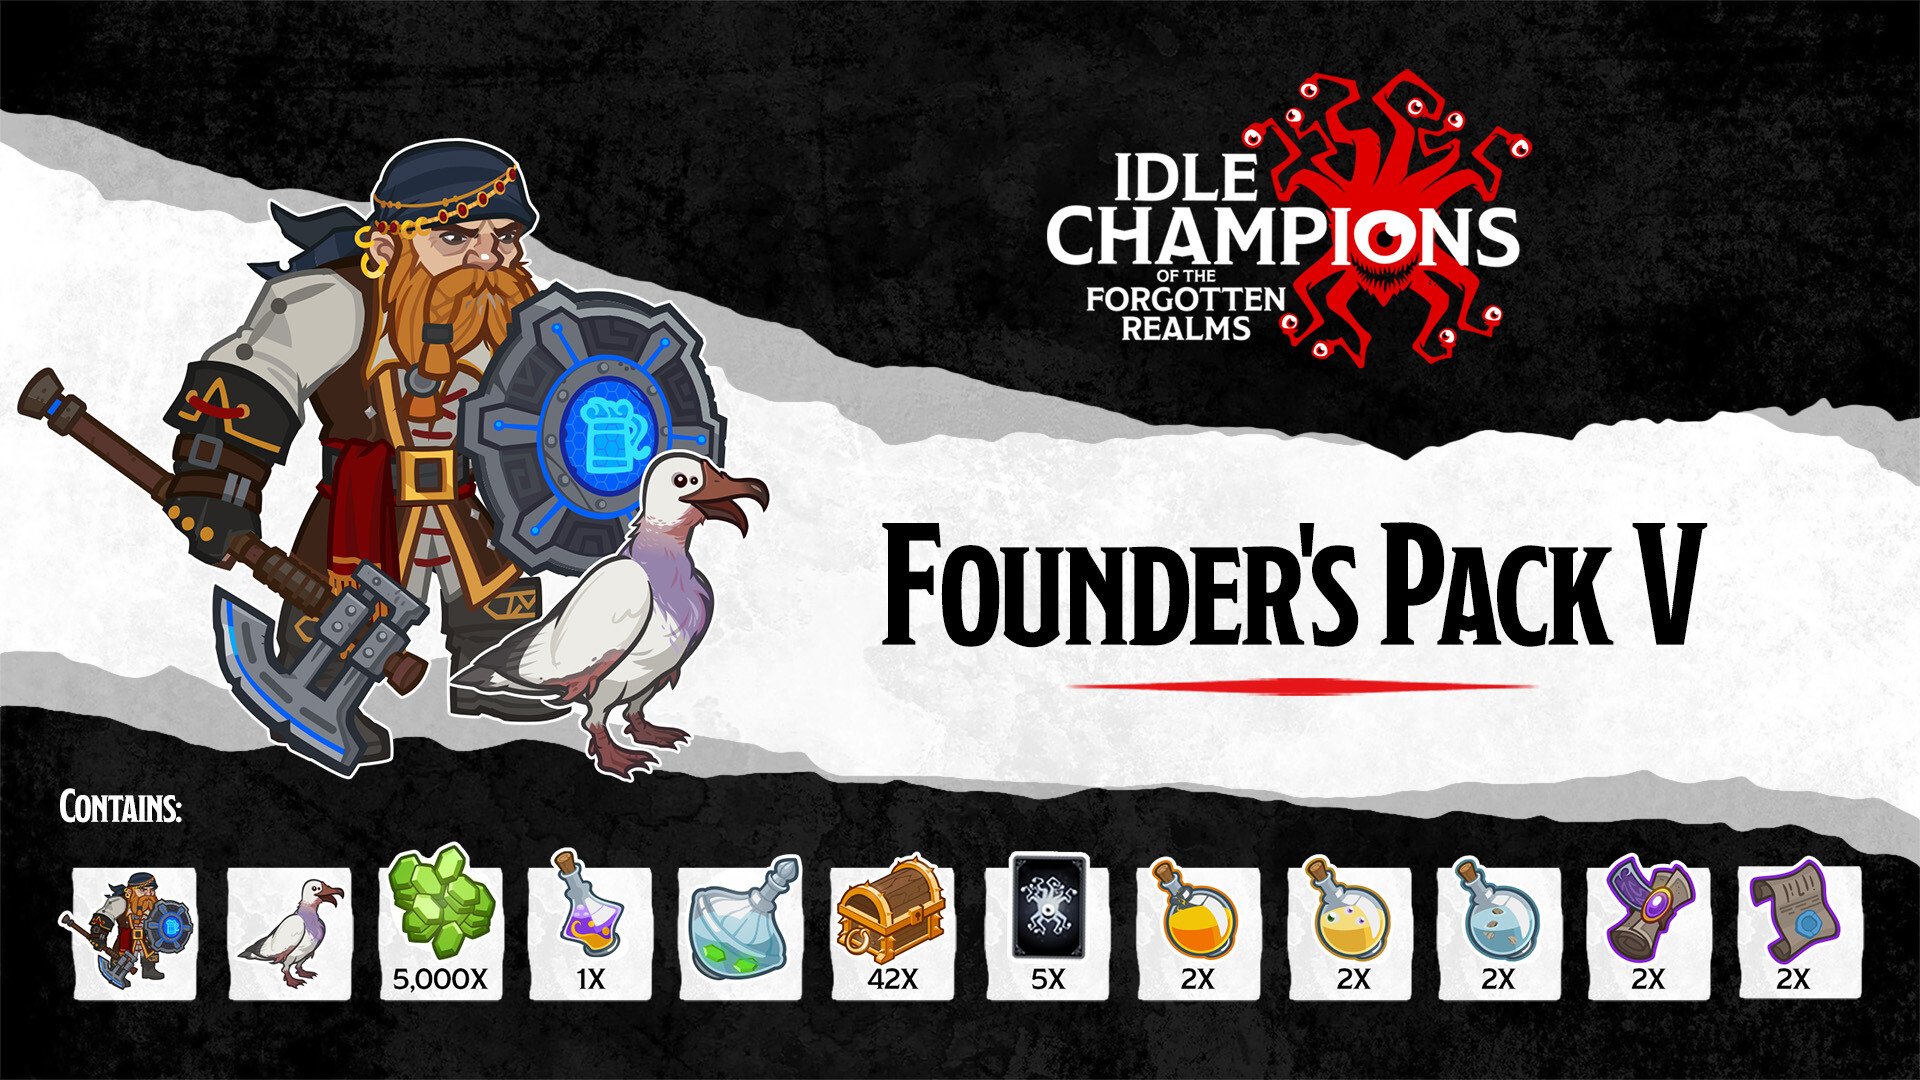 Idle Champions - Founder's Pack V Featured Screenshot #1